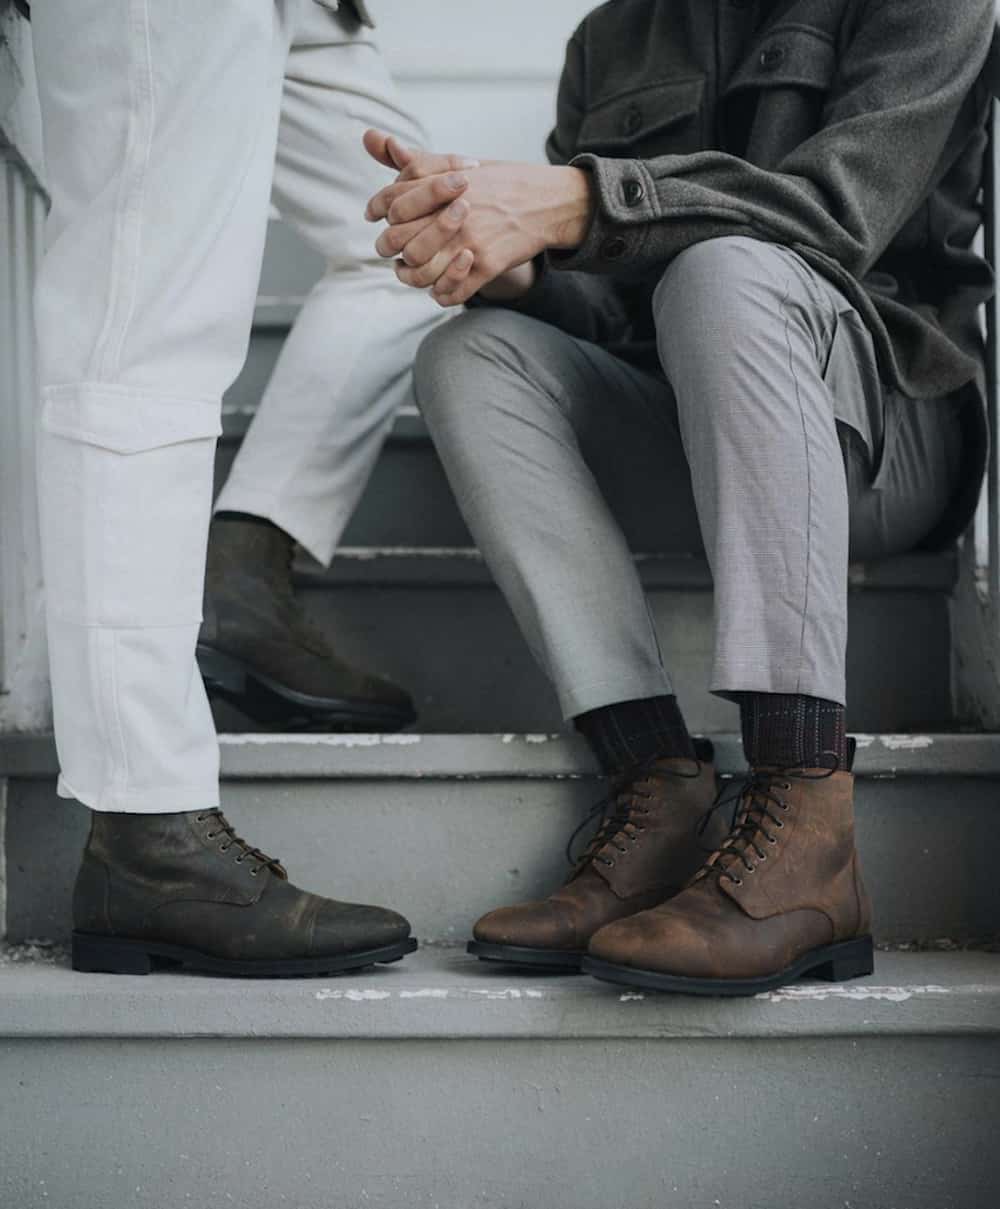 Environmentalist stretch Contraction Grey Pants Brown Shoes: How To Master This Outfit! (Men)